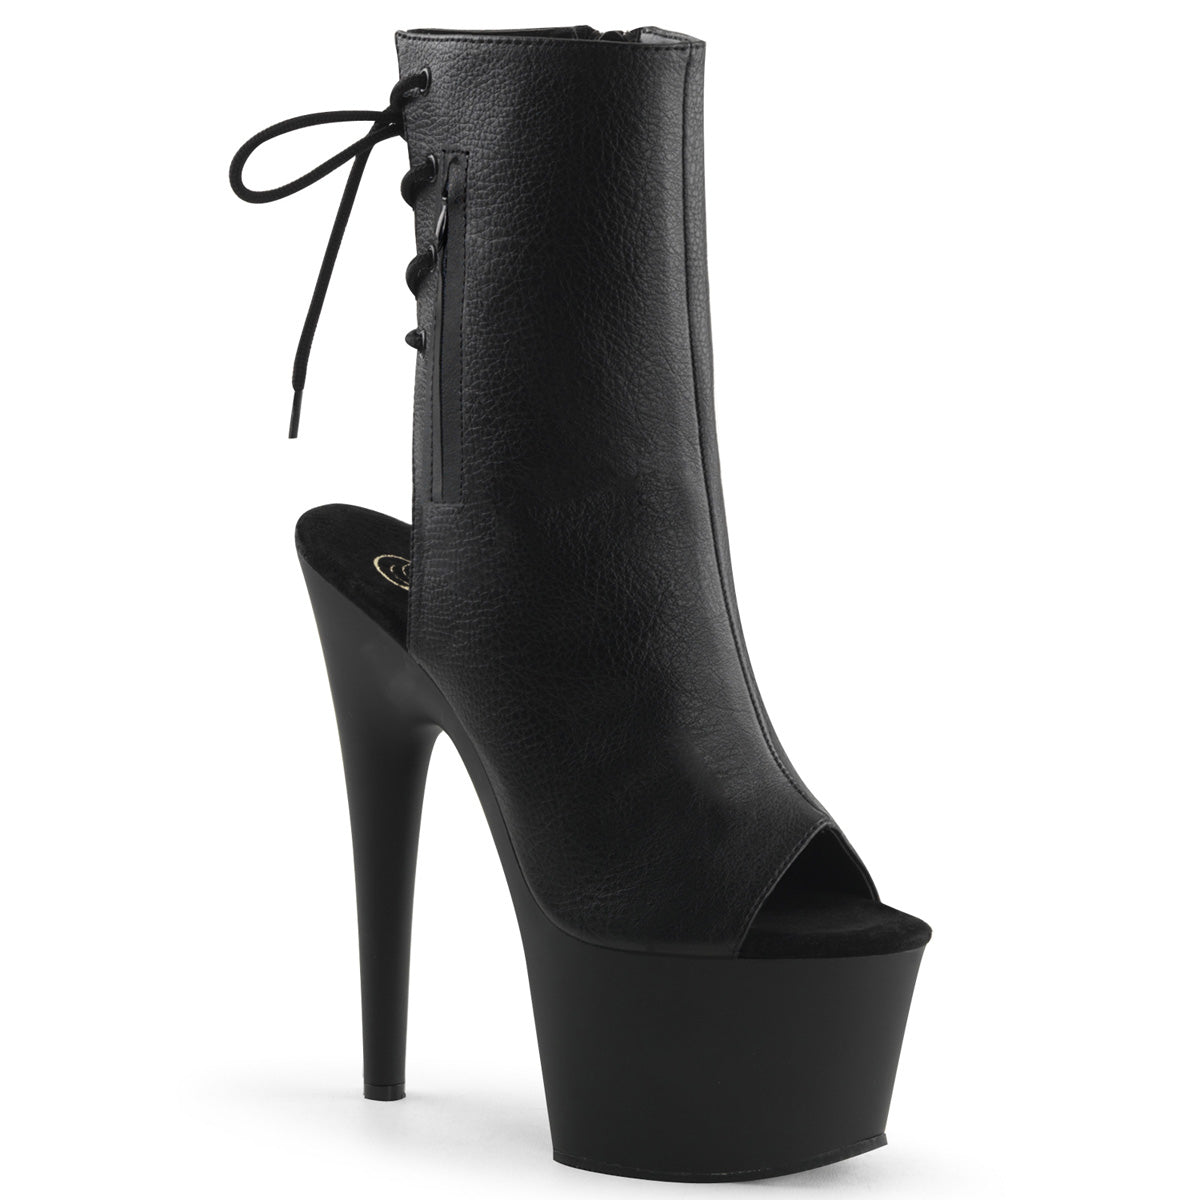 ADORE-1018 Pleasers 7 Inch Heel Black Strippers Ankle Boots